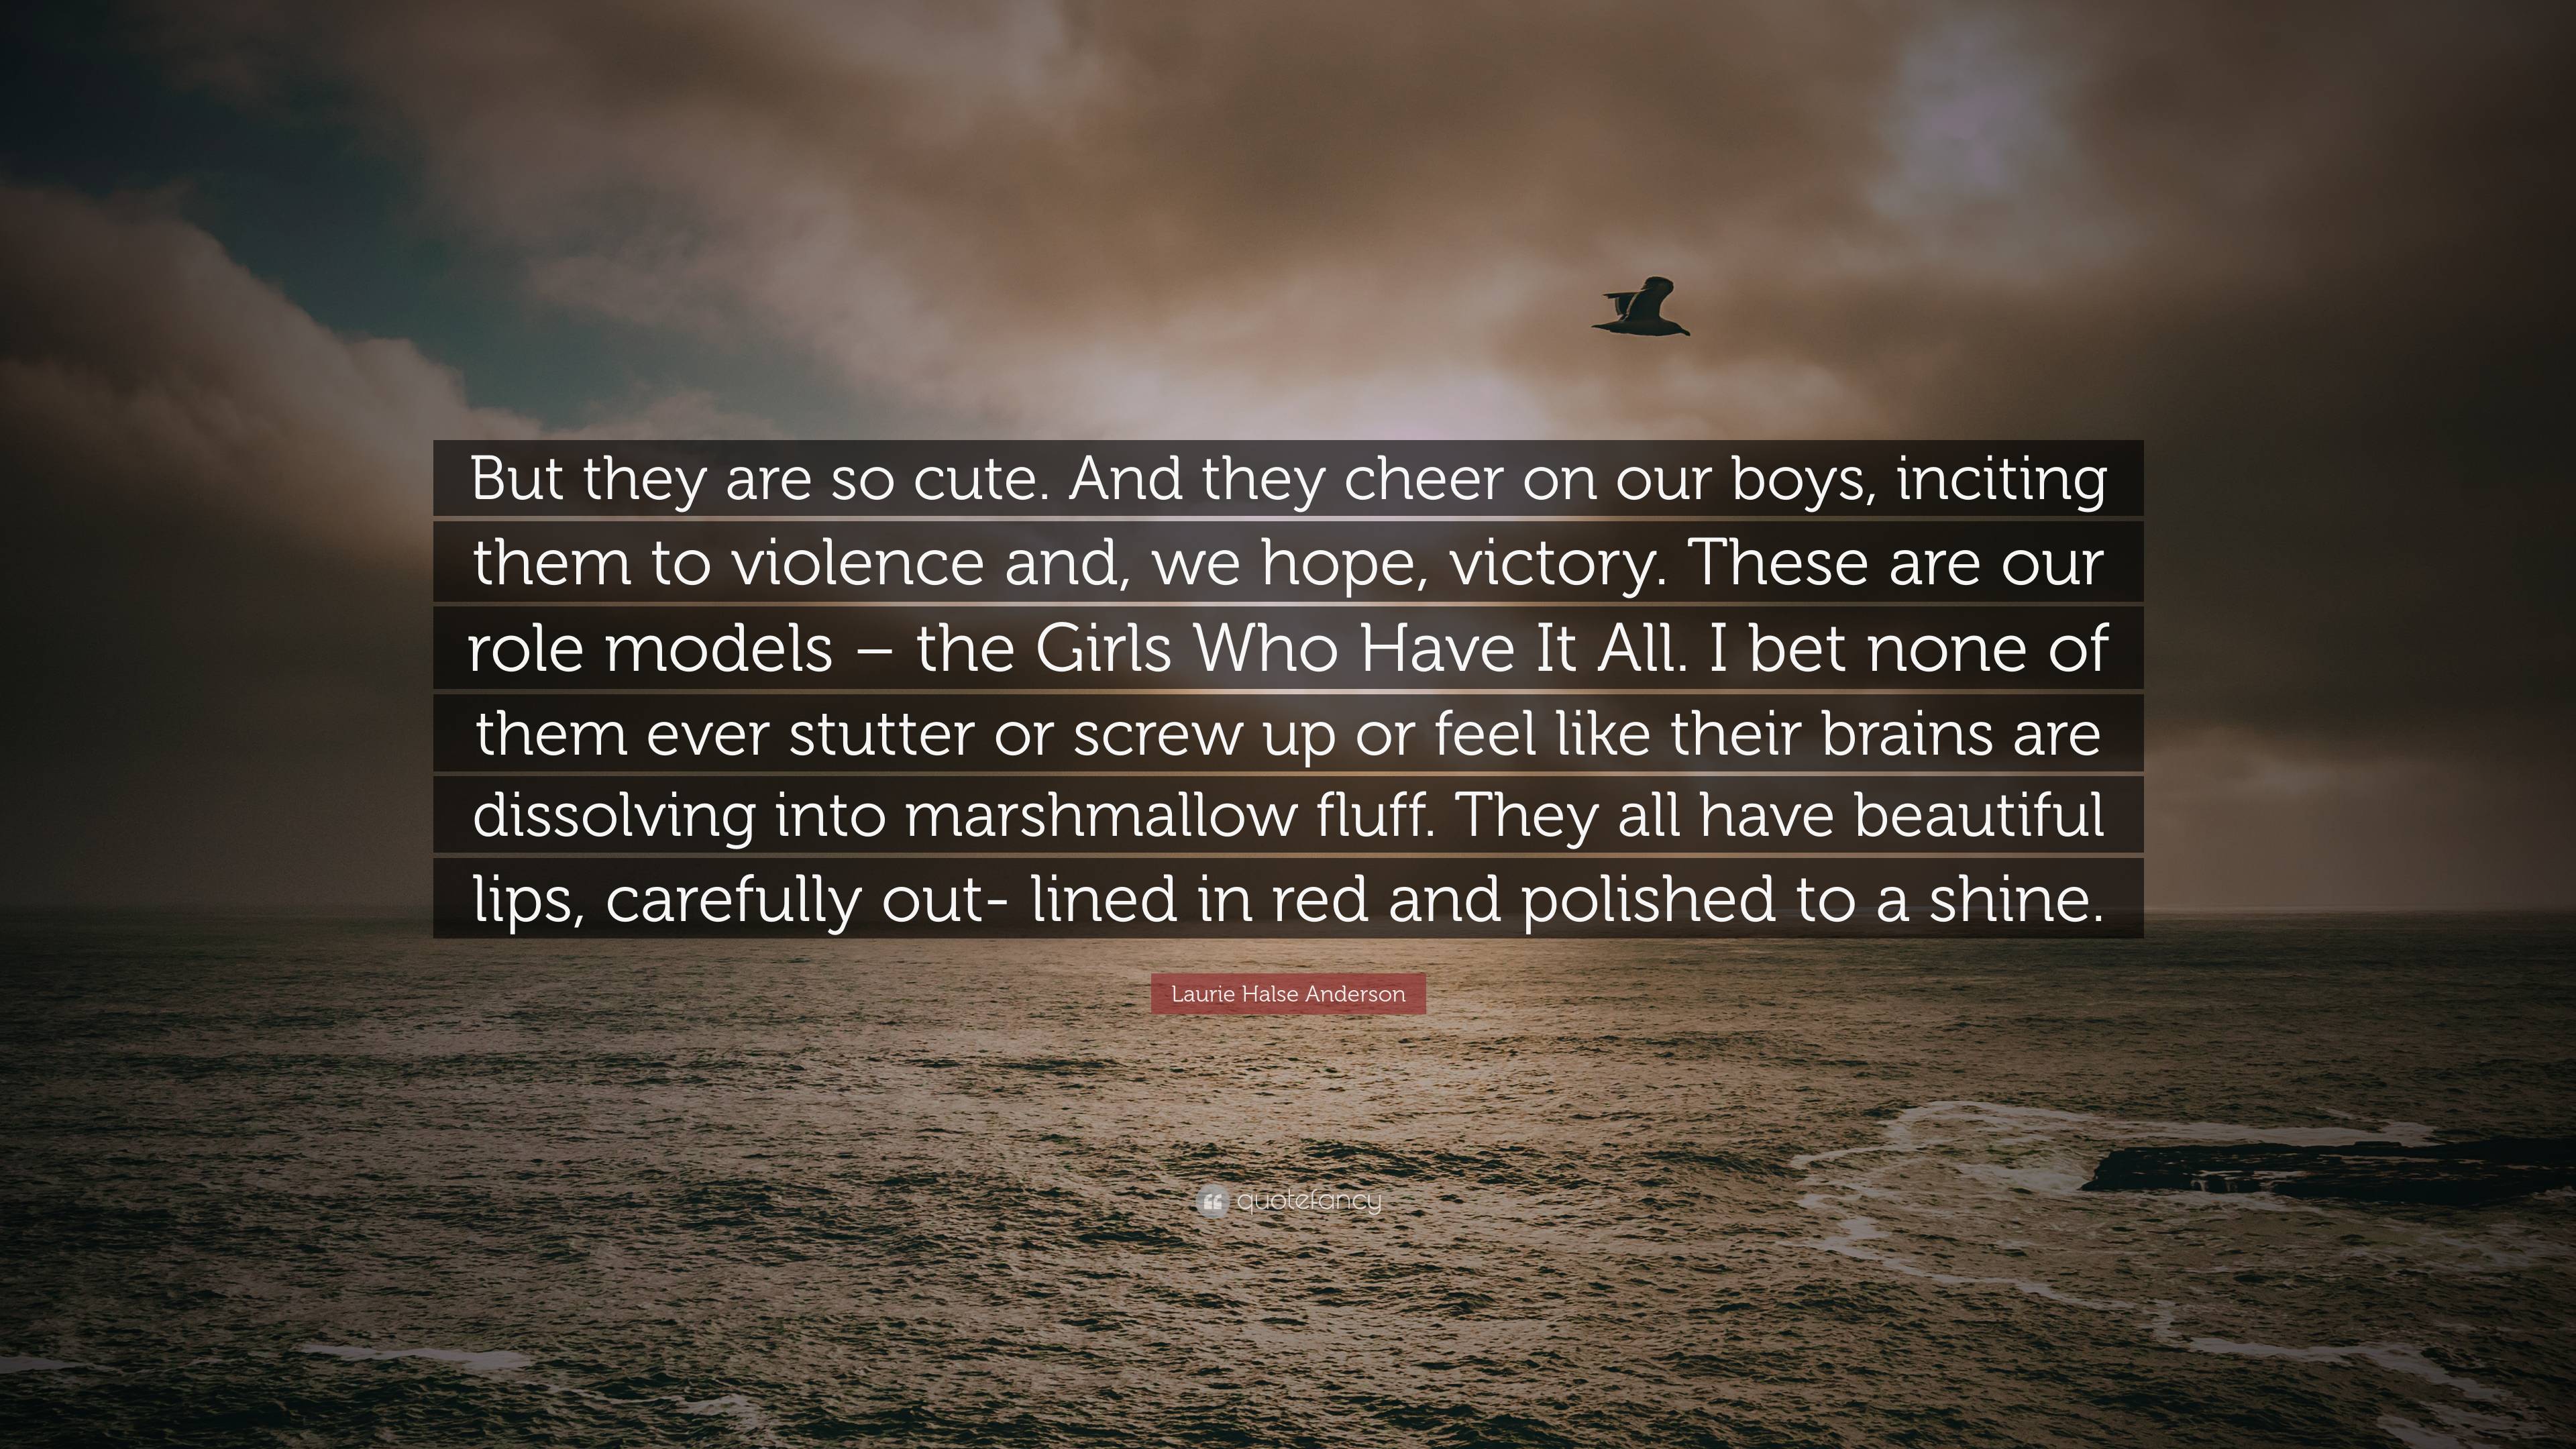 Laurie Halse Anderson Quote: “But they are so cute. And they cheer